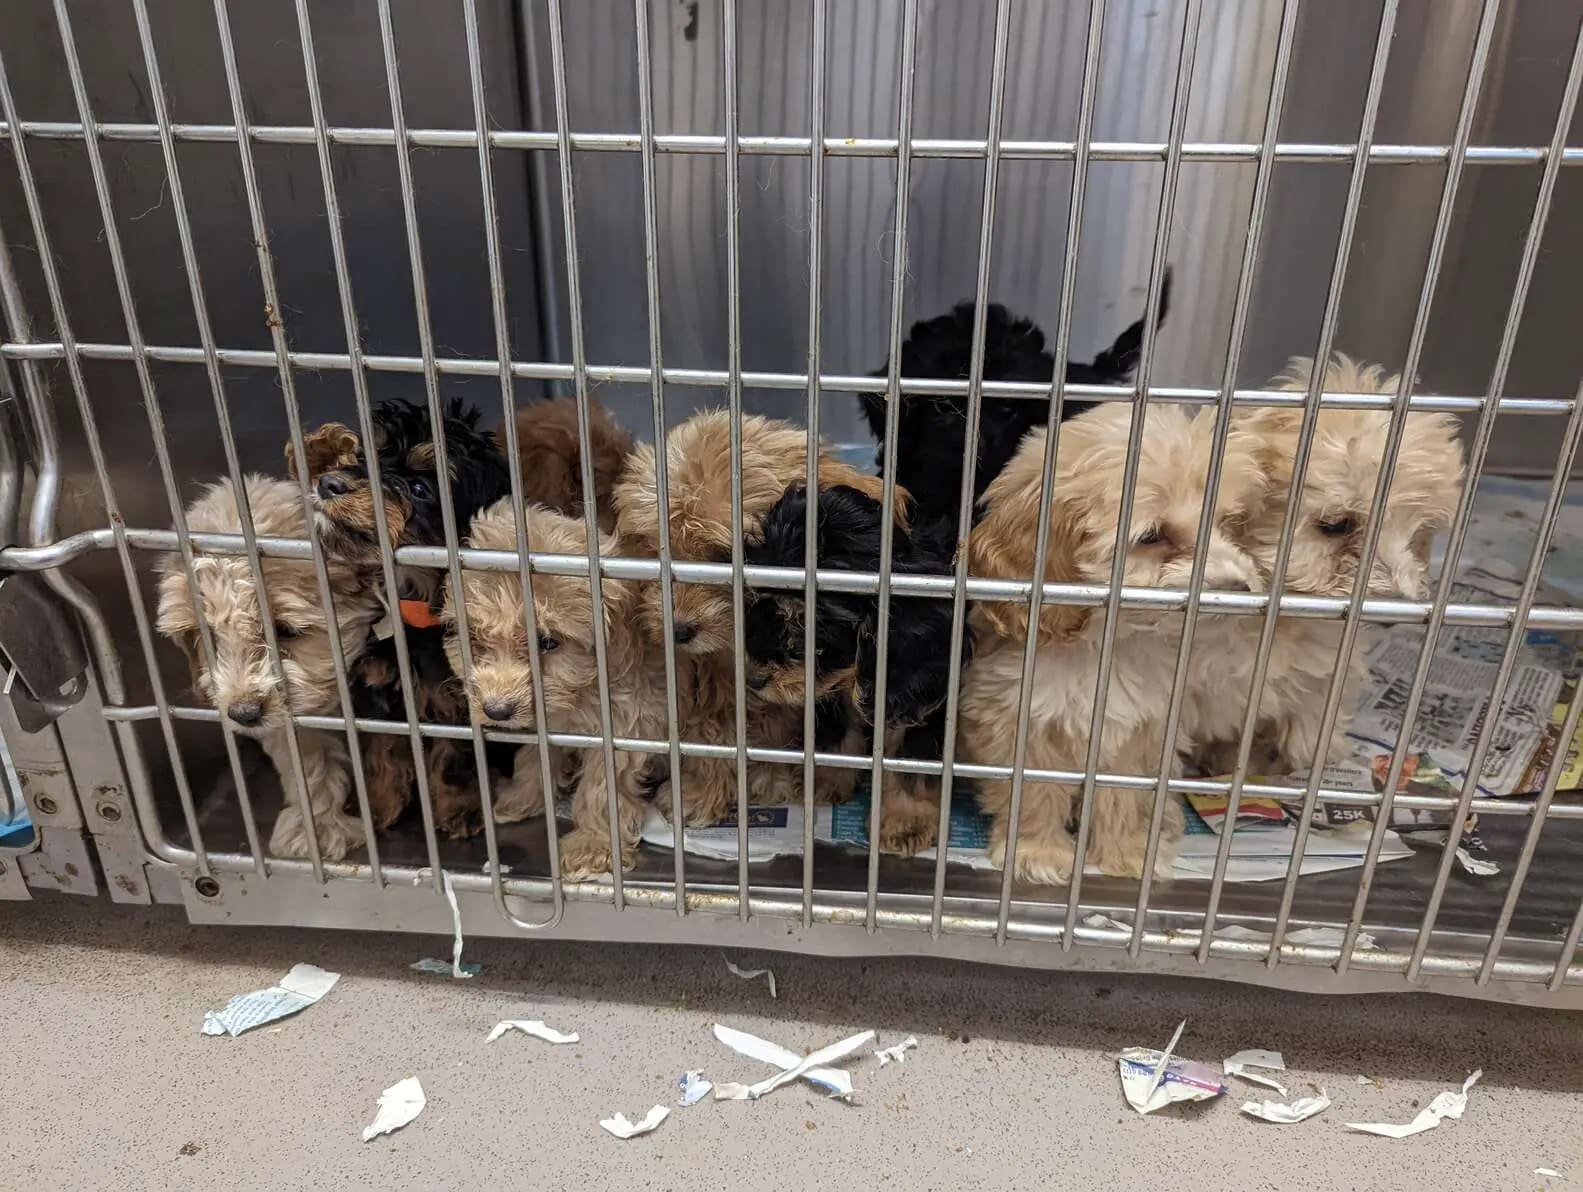 Man Taking a Stroll Surprised to See 20 Puppies Left Behind in a Cage by the Road